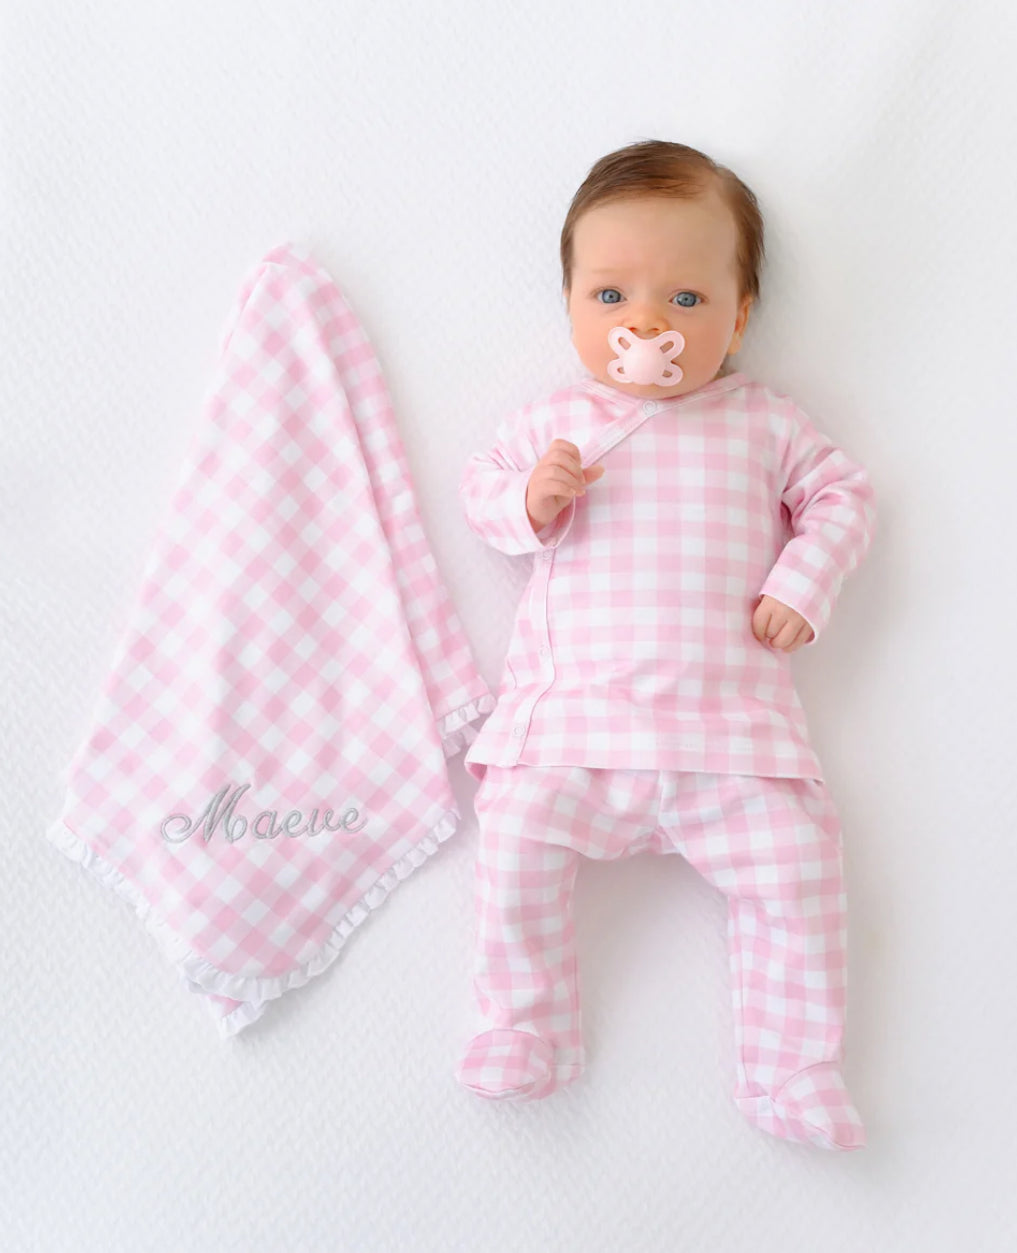 Beaufort Bonnet Baby Buggy Blanket-Palm Beach Pink Gingham With Worth Avenue White